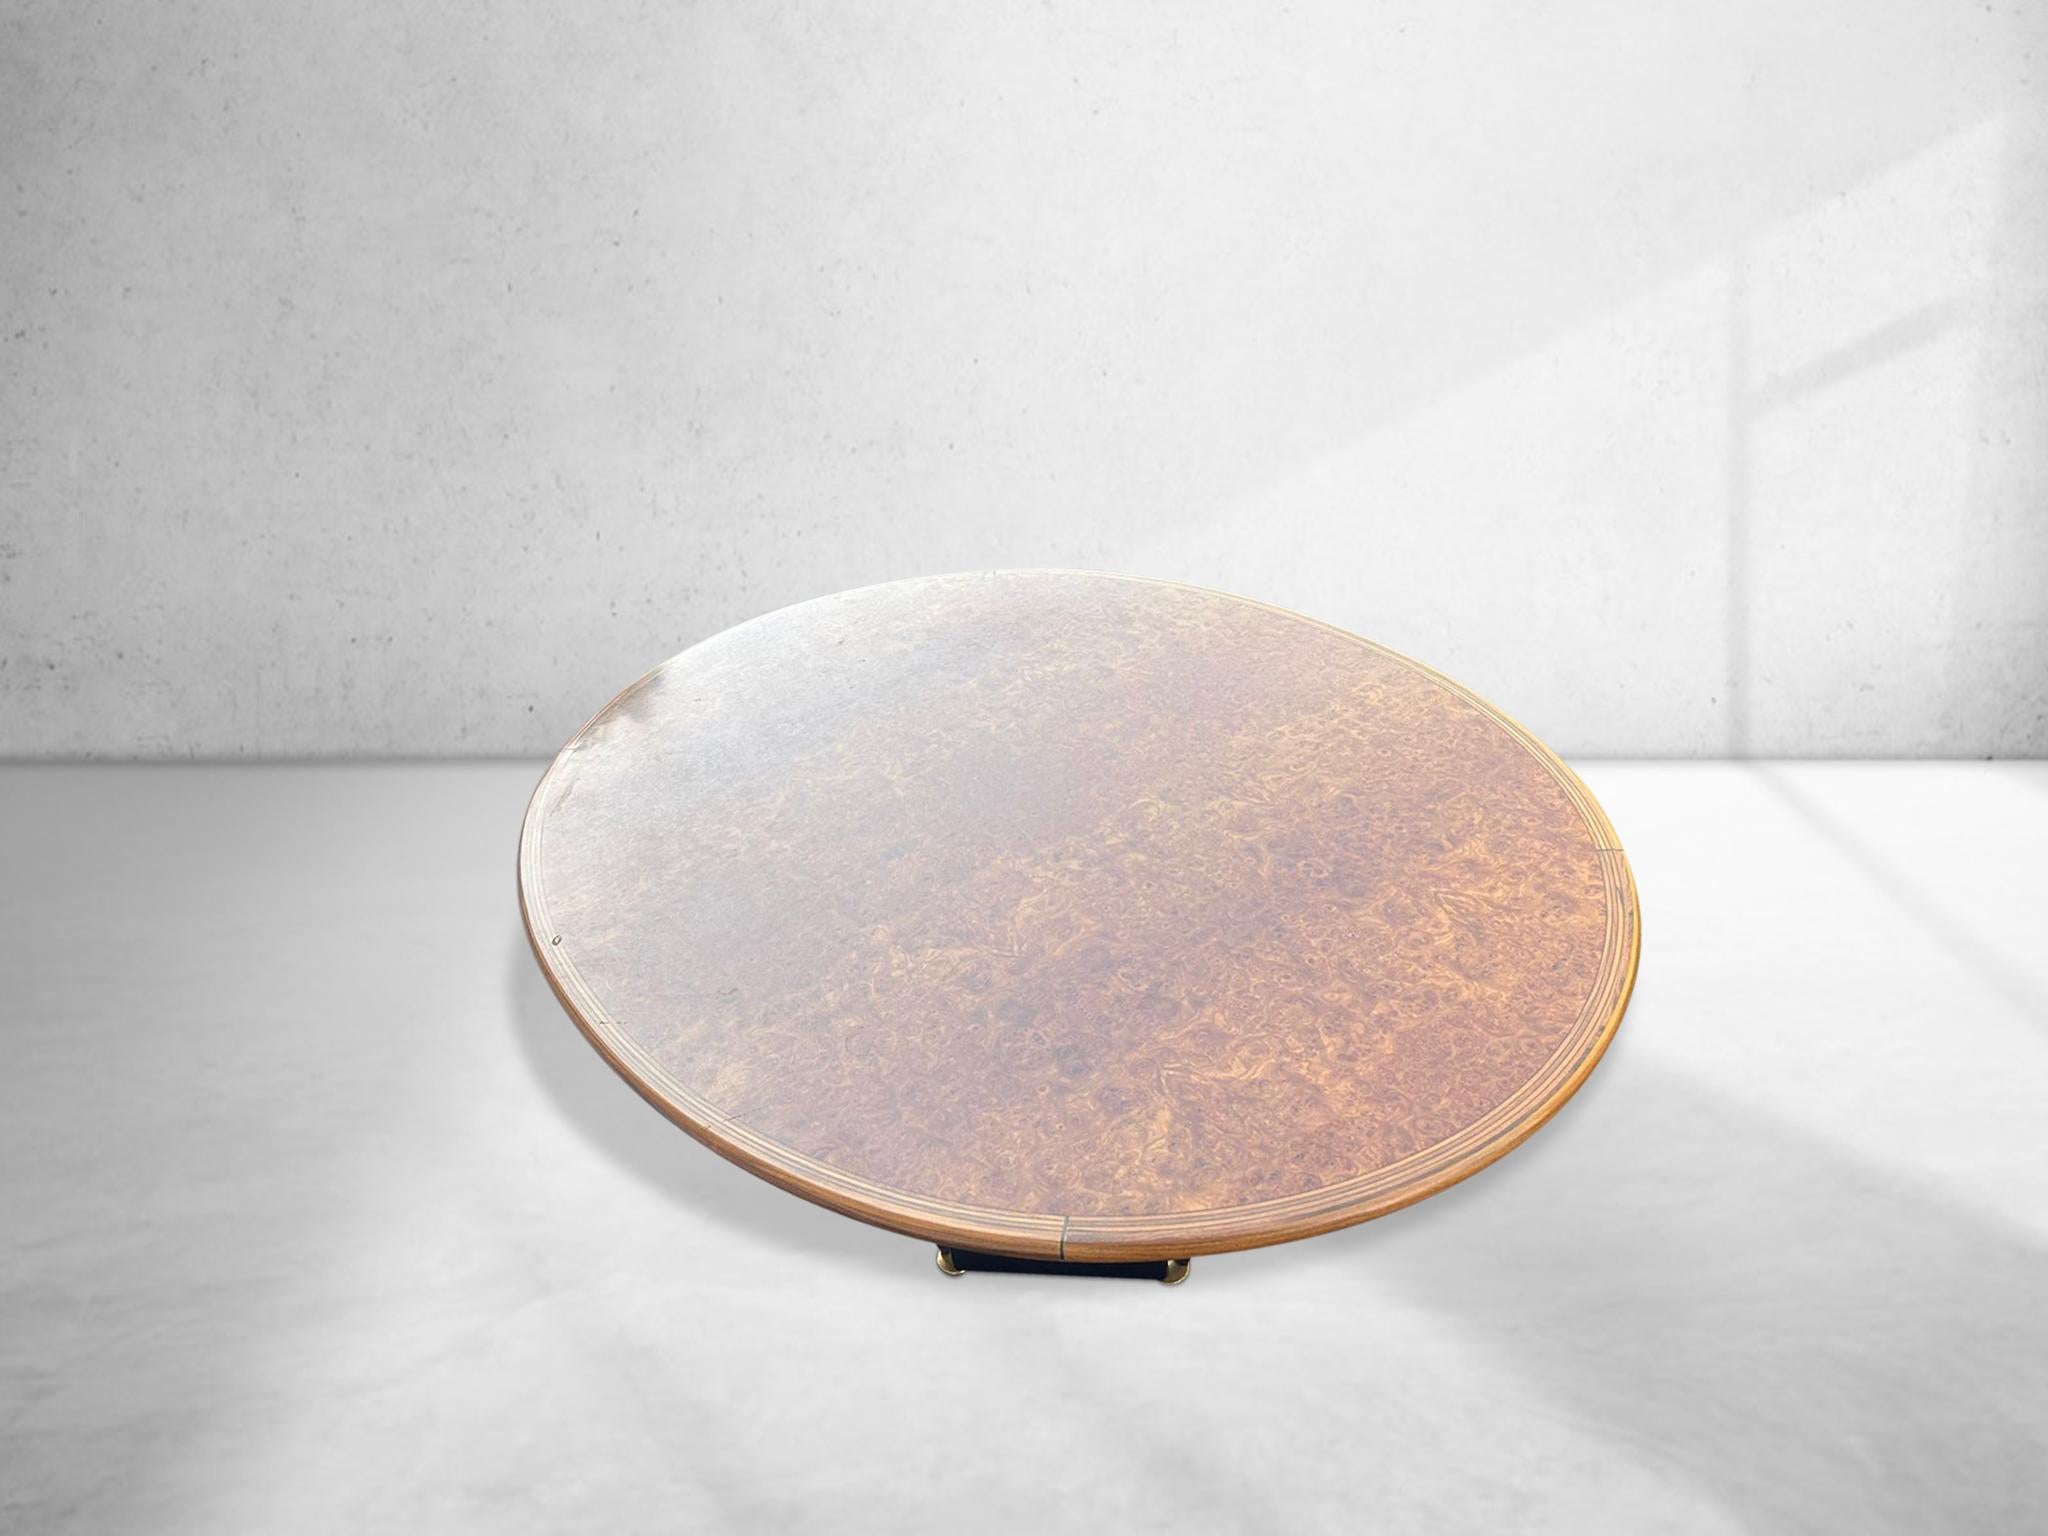 A rare oval version of the Africa dining table by Afra and Tobia Scarpa for Maxalto, as part of the Artona series. This table will ideally be combined with the matching Africa dining chairs, or with 121 or Monk chairs from the same designers.

The